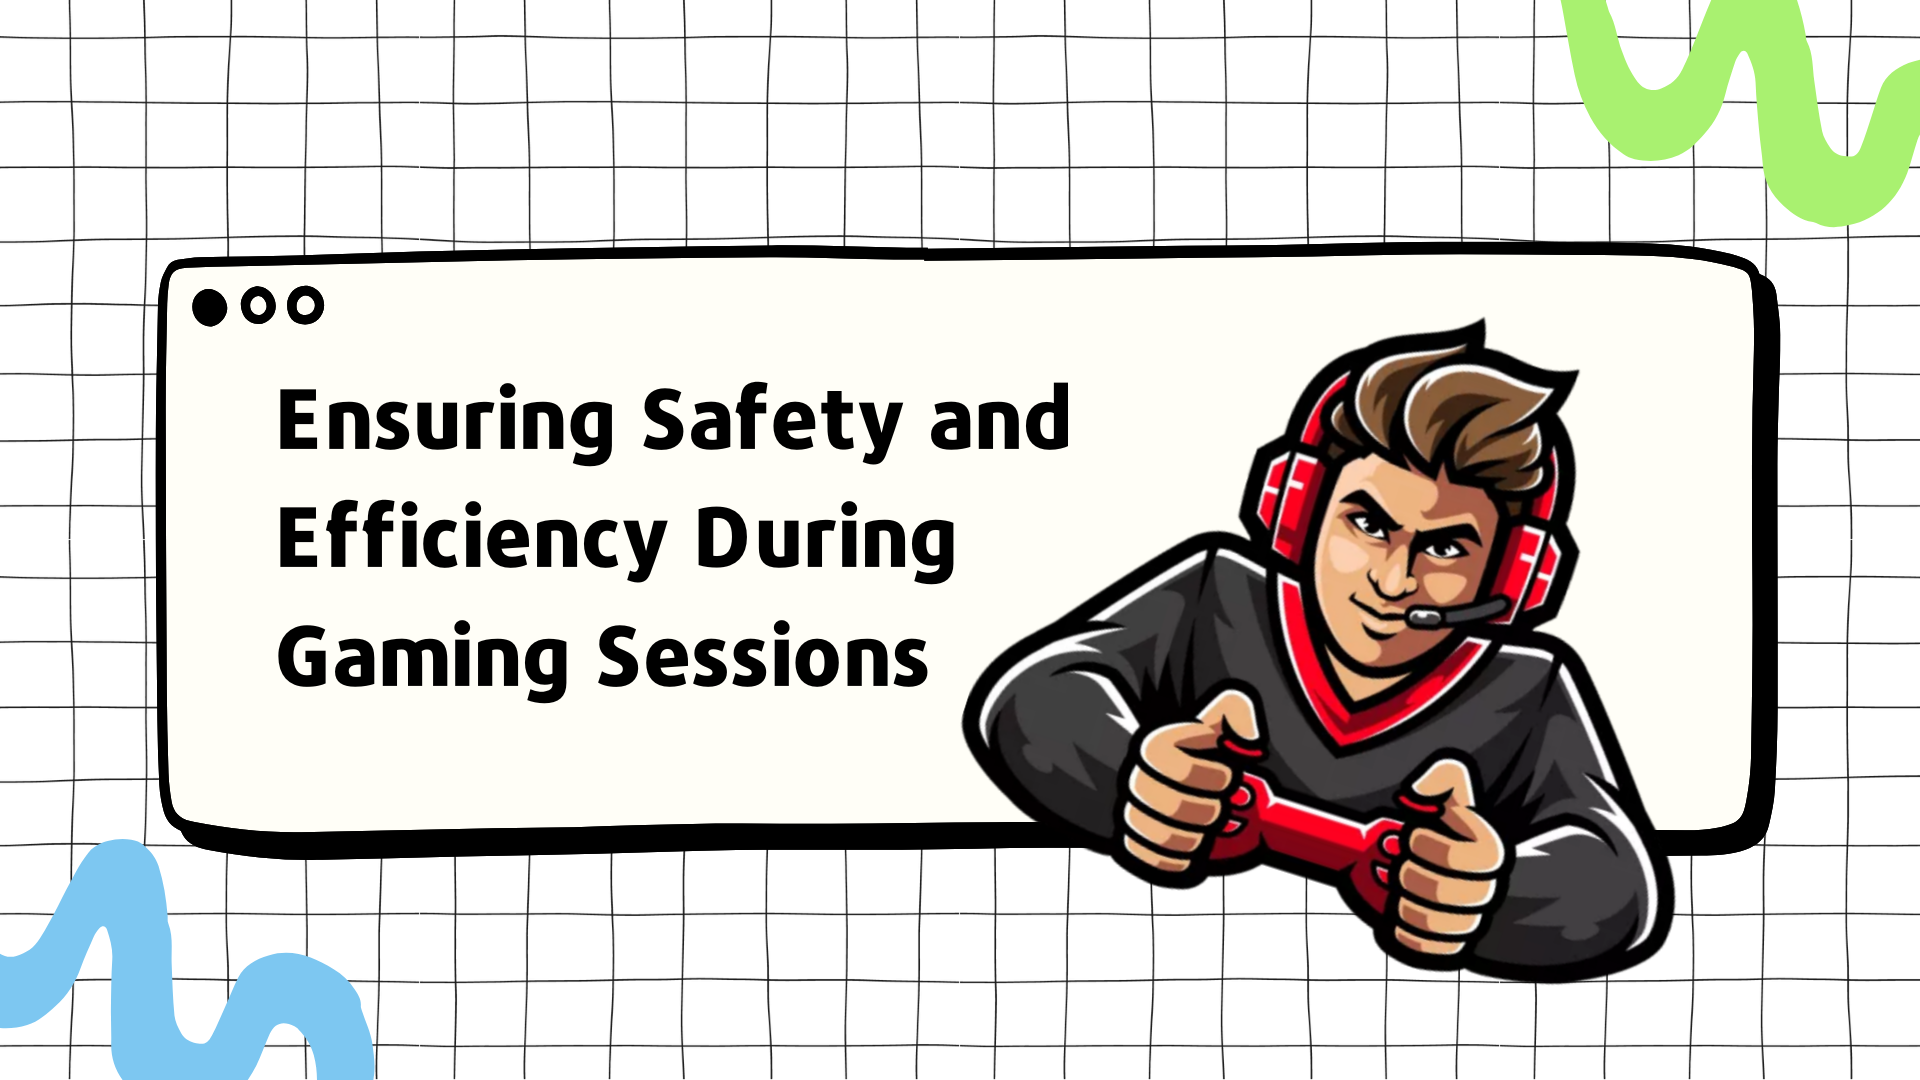 Ensuring Safety and Efficiency During Gaming Sessions